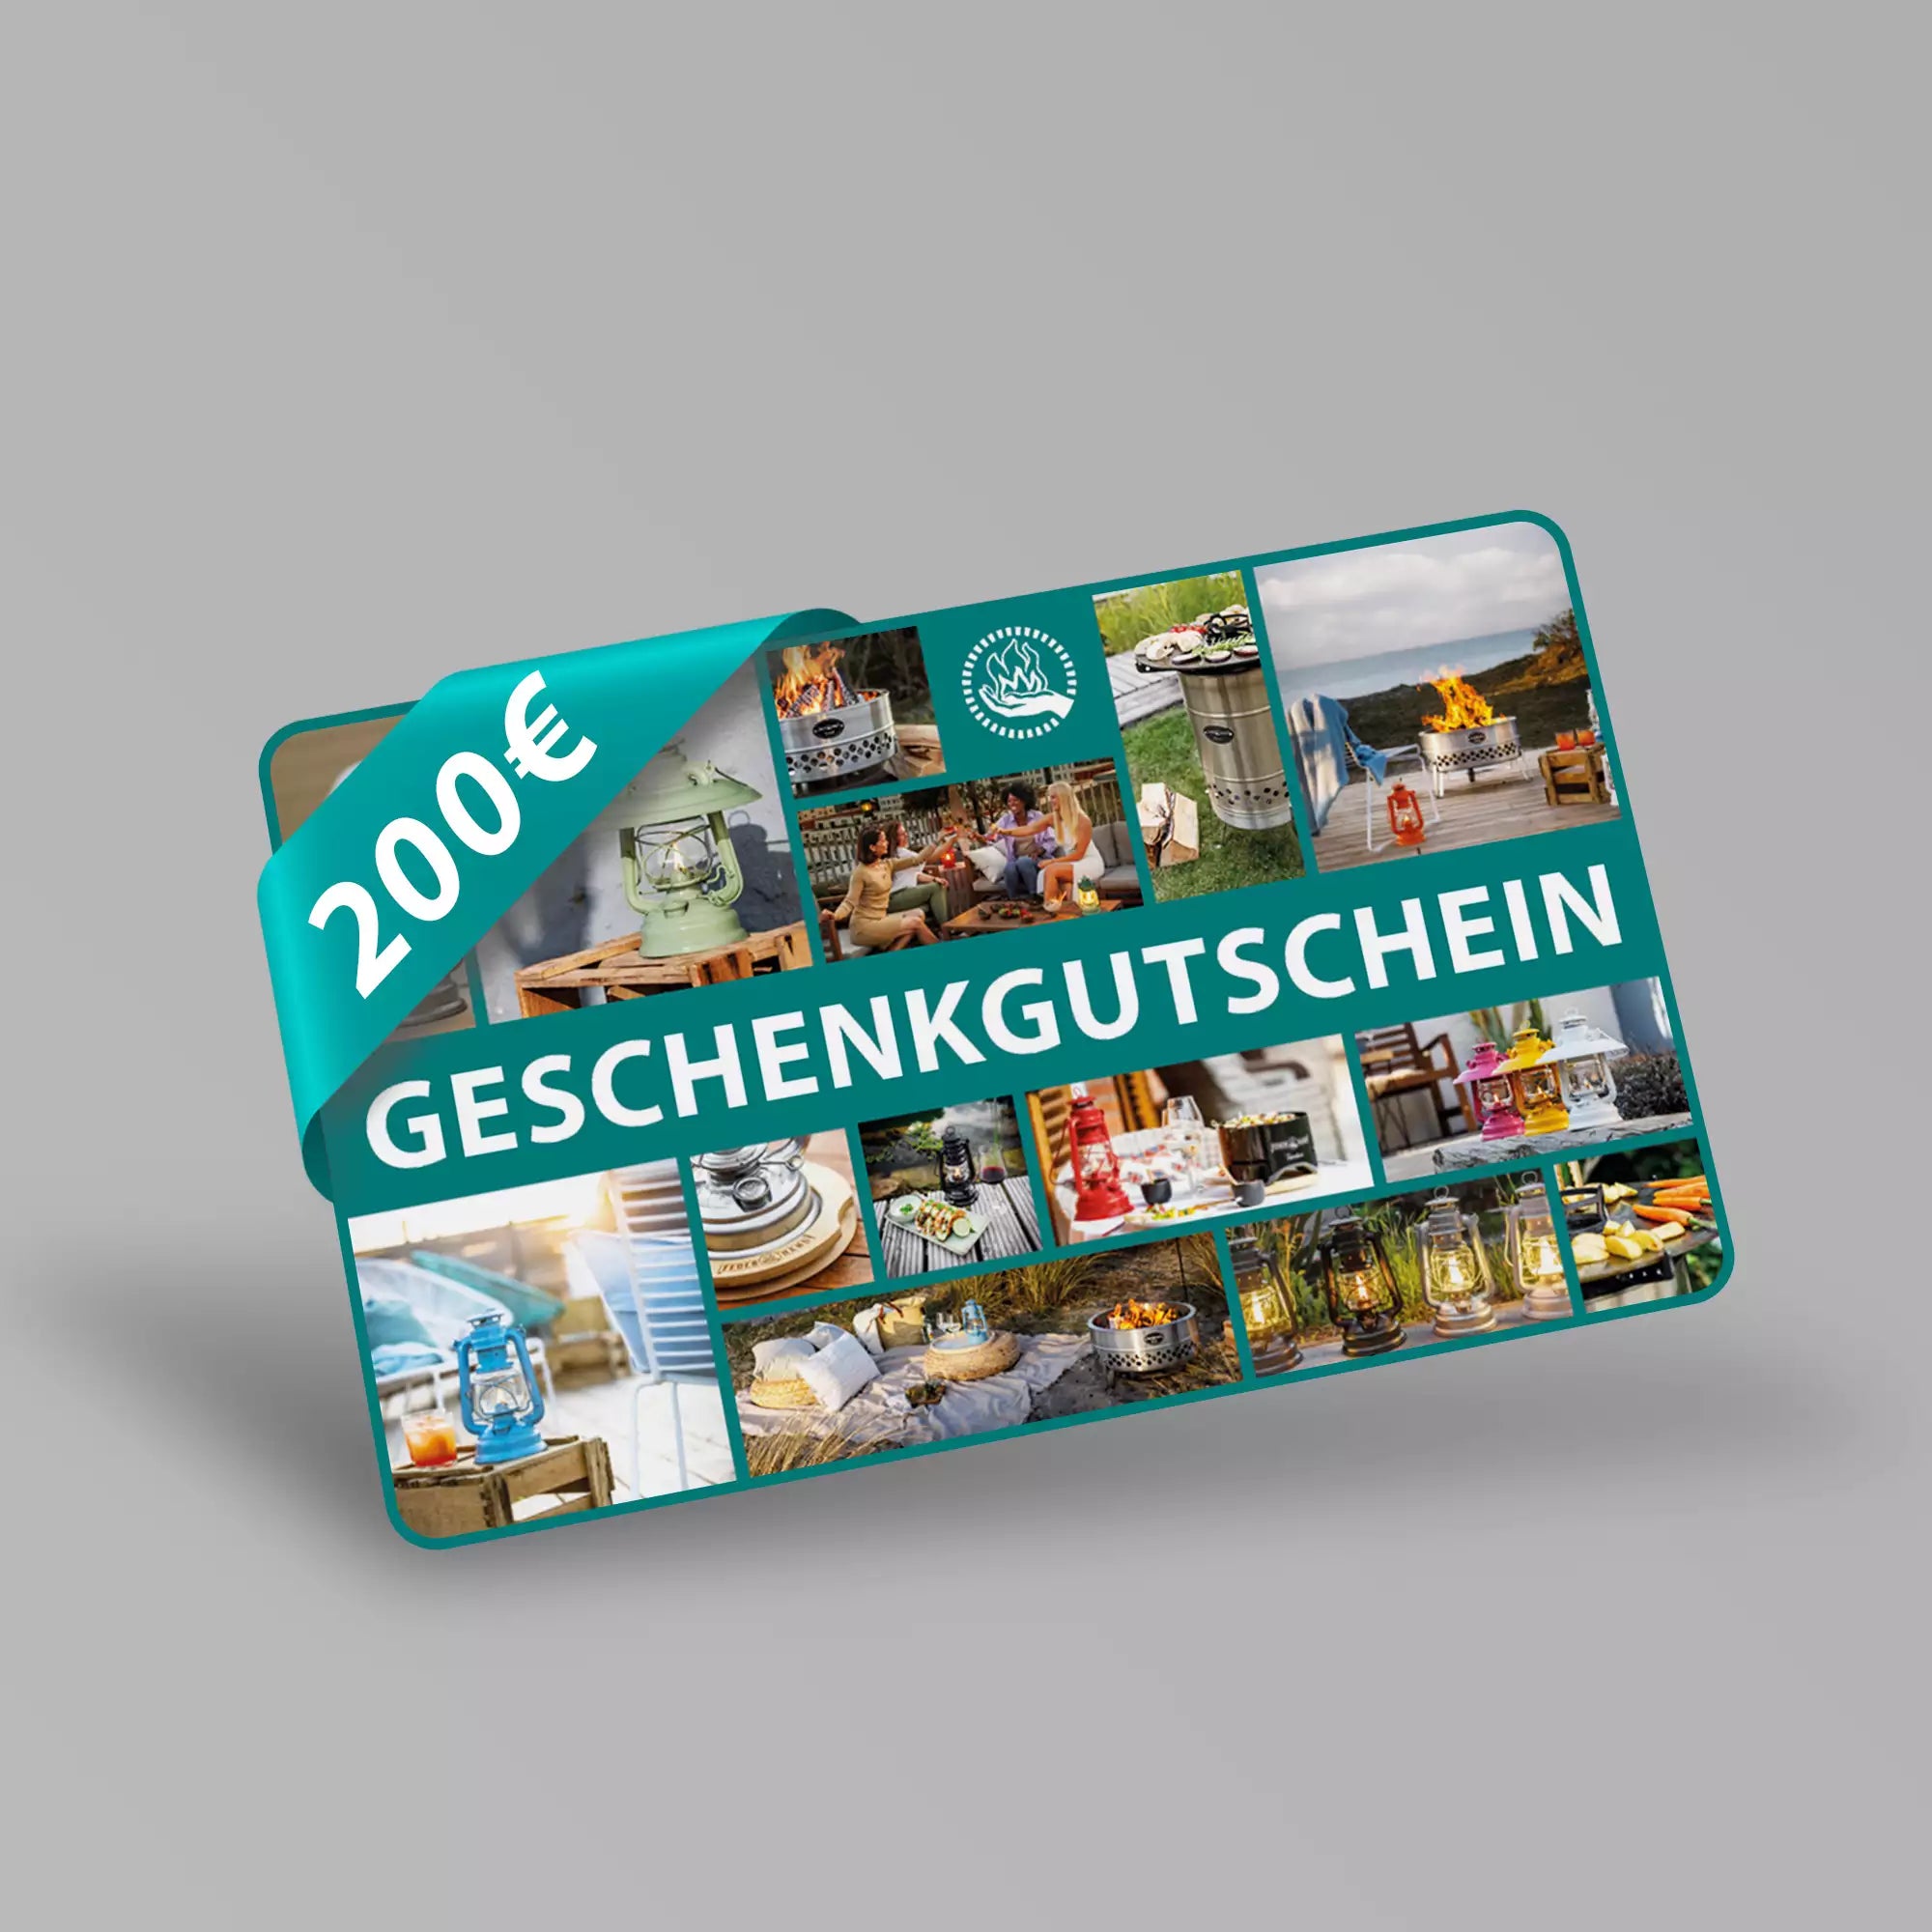 Feuerhand gift voucher (to print out)